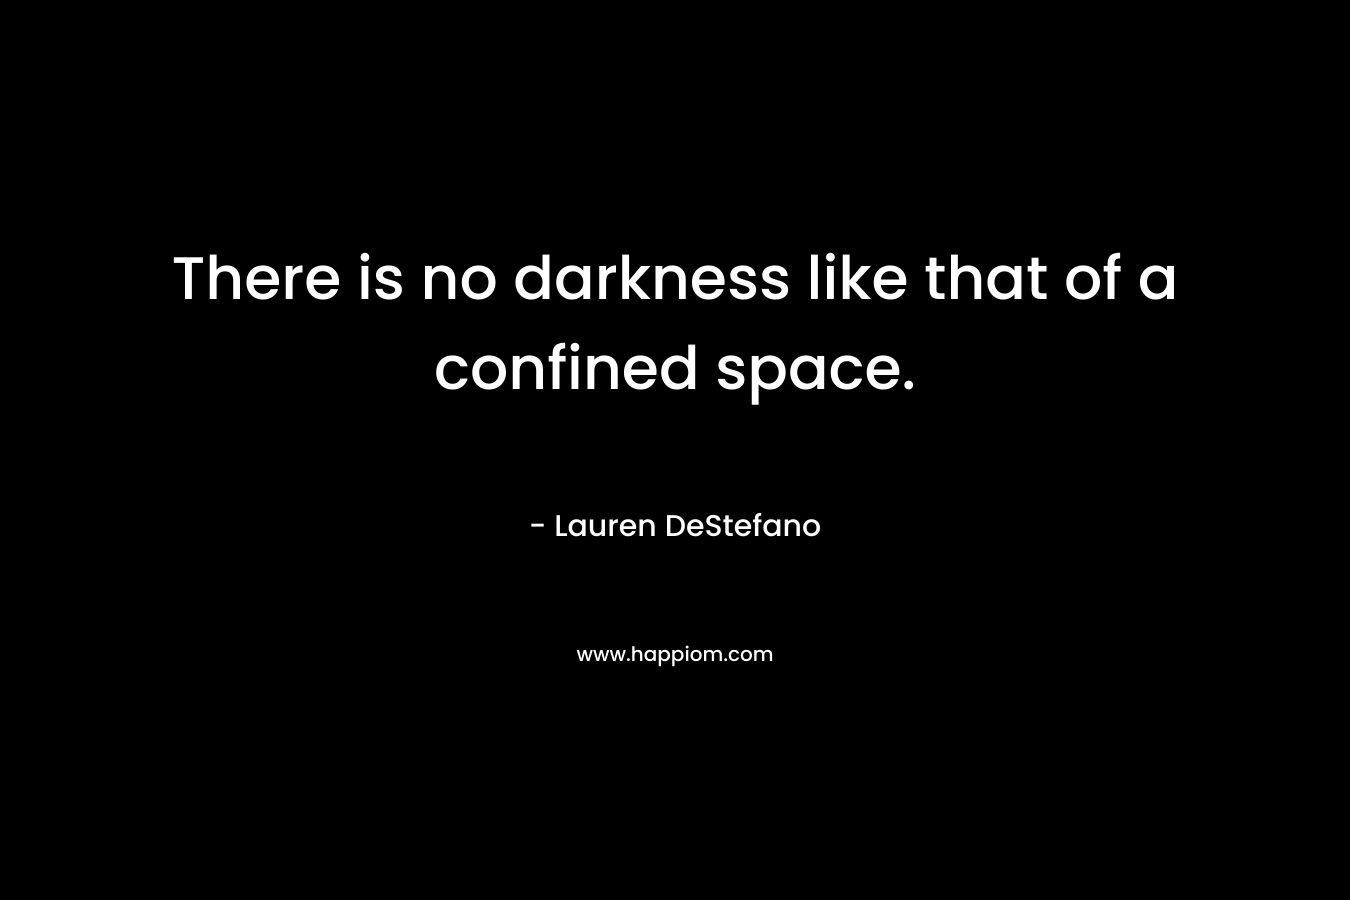 There is no darkness like that of a confined space.